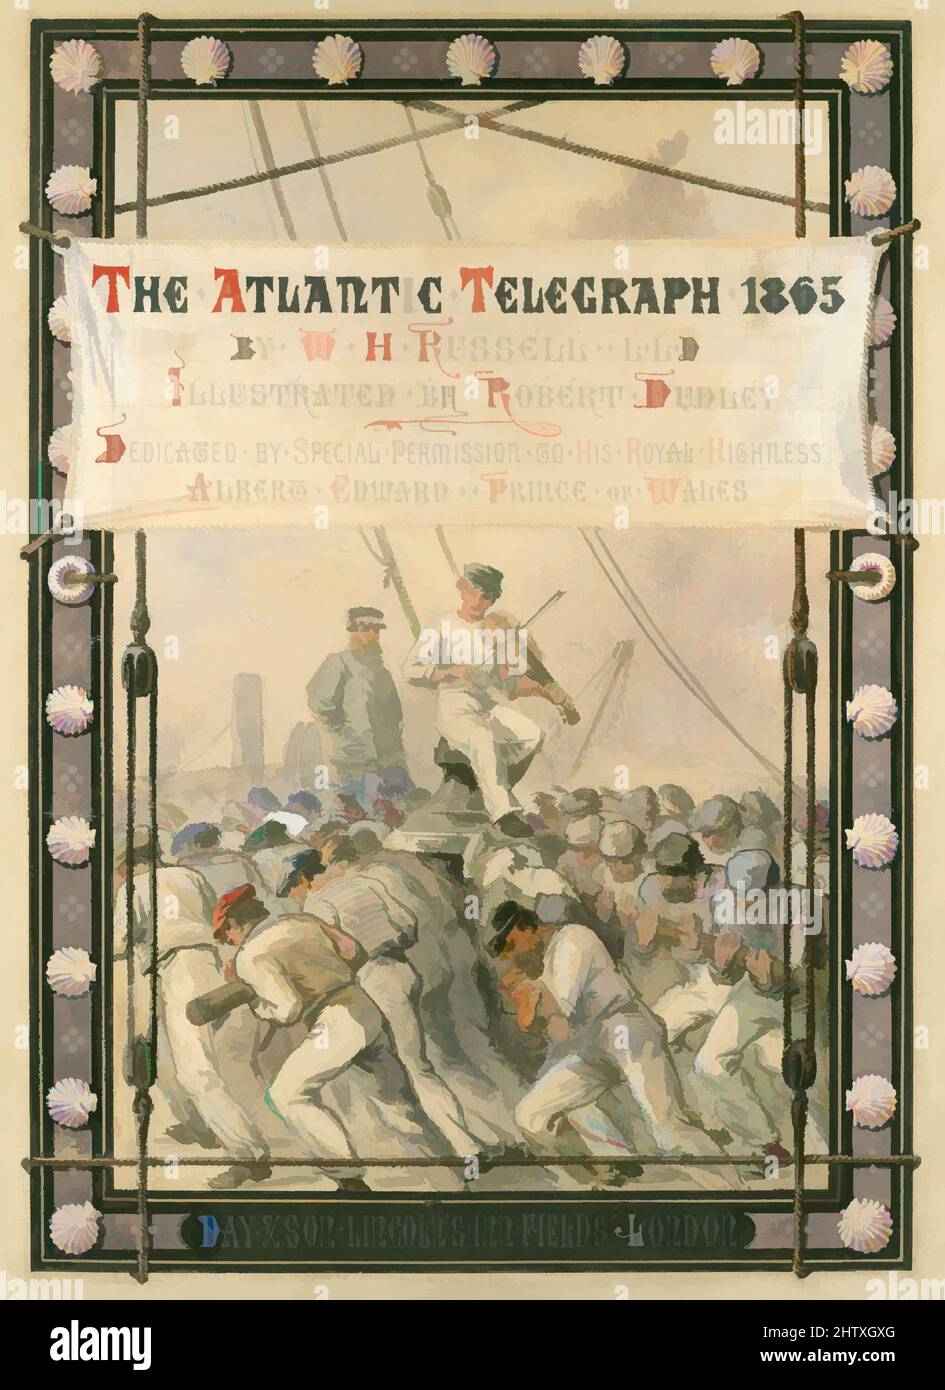 Art inspired by The Atlantic Telegraph, 1866, Illustrations: color lithography, 16 15/16 x 12 1/16 x 1 3/16 in. (43 x 30.6 x 3 cm), Books, This book documents the great 19th century technological achievement of laying a telegraphic cable beneath the Atlantic to allow messages to speed, Classic works modernized by Artotop with a splash of modernity. Shapes, color and value, eye-catching visual impact on art. Emotions through freedom of artworks in a contemporary way. A timeless message pursuing a wildly creative new direction. Artists turning to the digital medium and creating the Artotop NFT Stock Photo